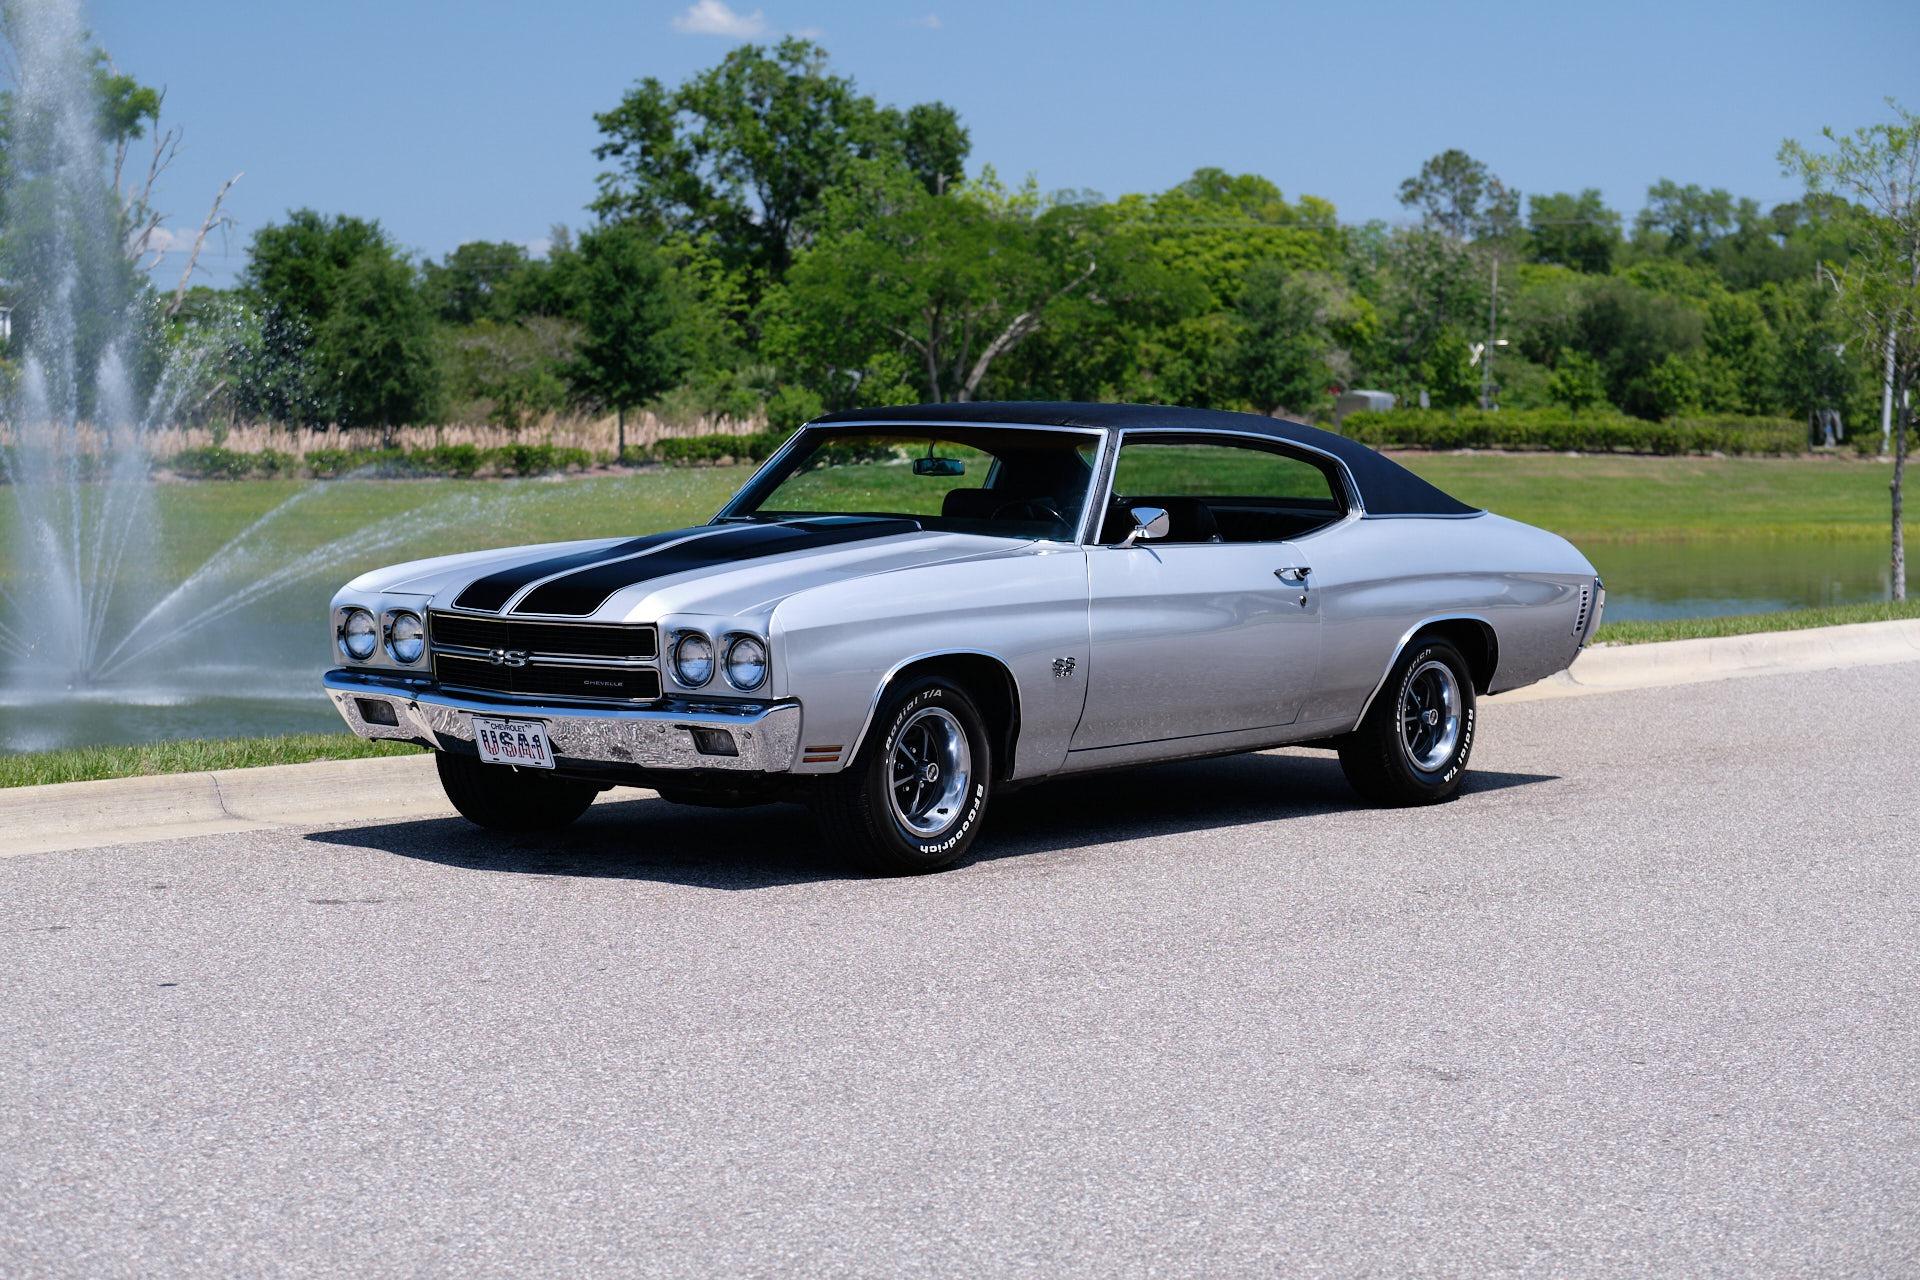 The 1970 Chevrolet CHEVELLE SS Build Sheet and Protecto Plate photos